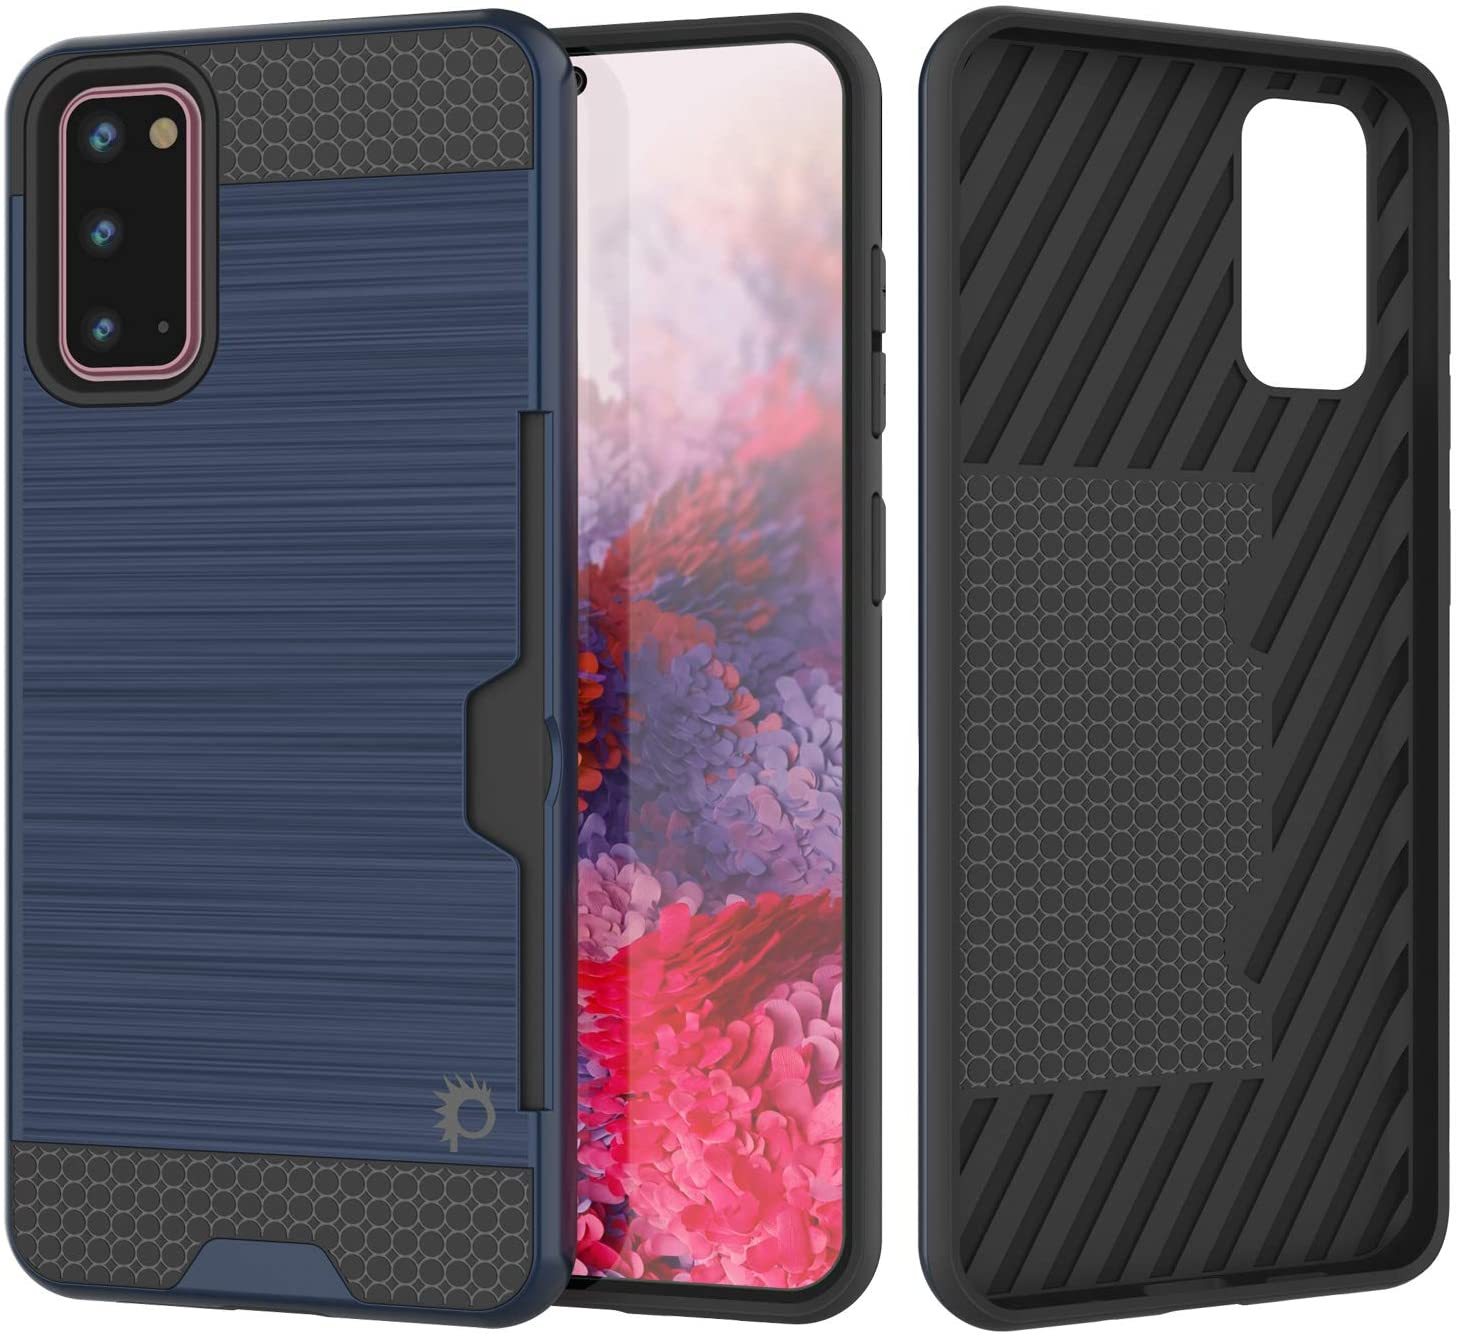 Galaxy S20 Case, PUNKcase [SLOT Series] [Slim Fit] Dual-Layer Armor Cover w/Integrated Anti-Shock System, Credit Card Slot [Navy]